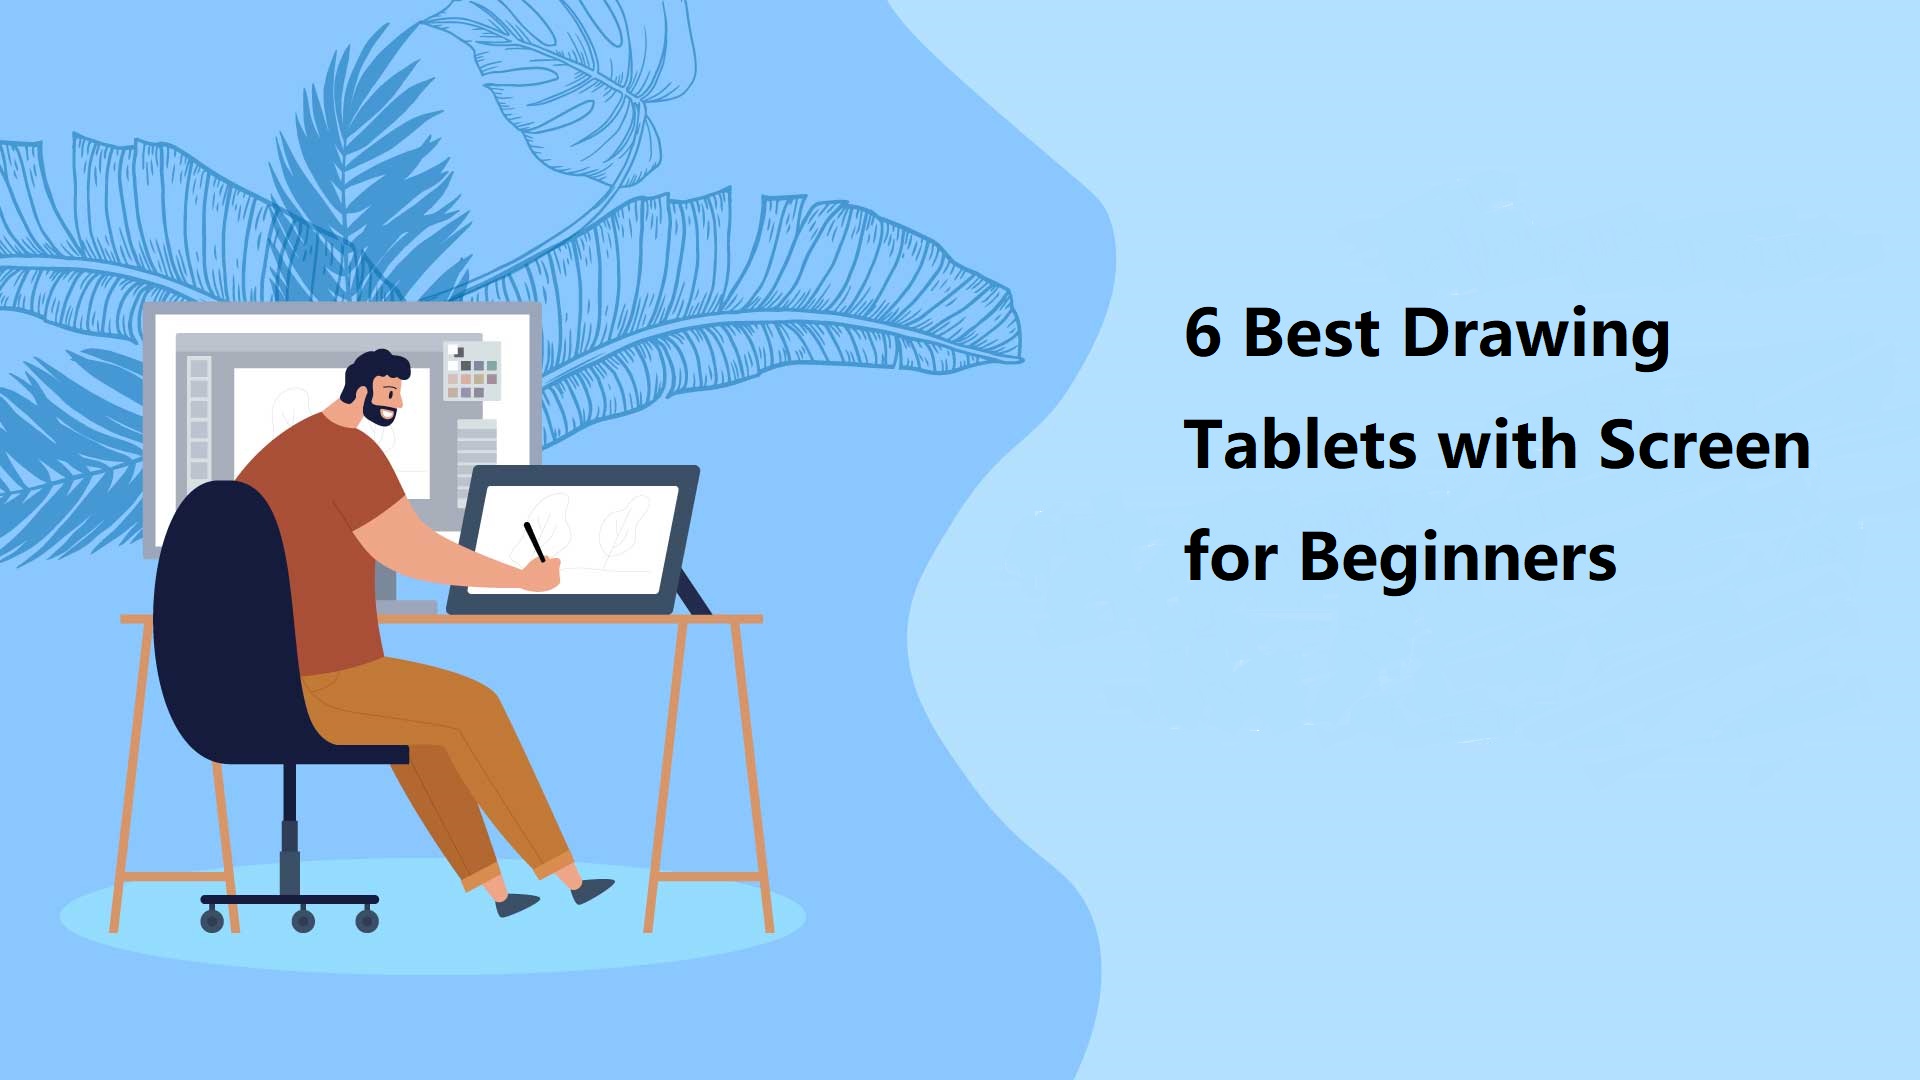 Best Drawing Tablets with Screen for Beginners